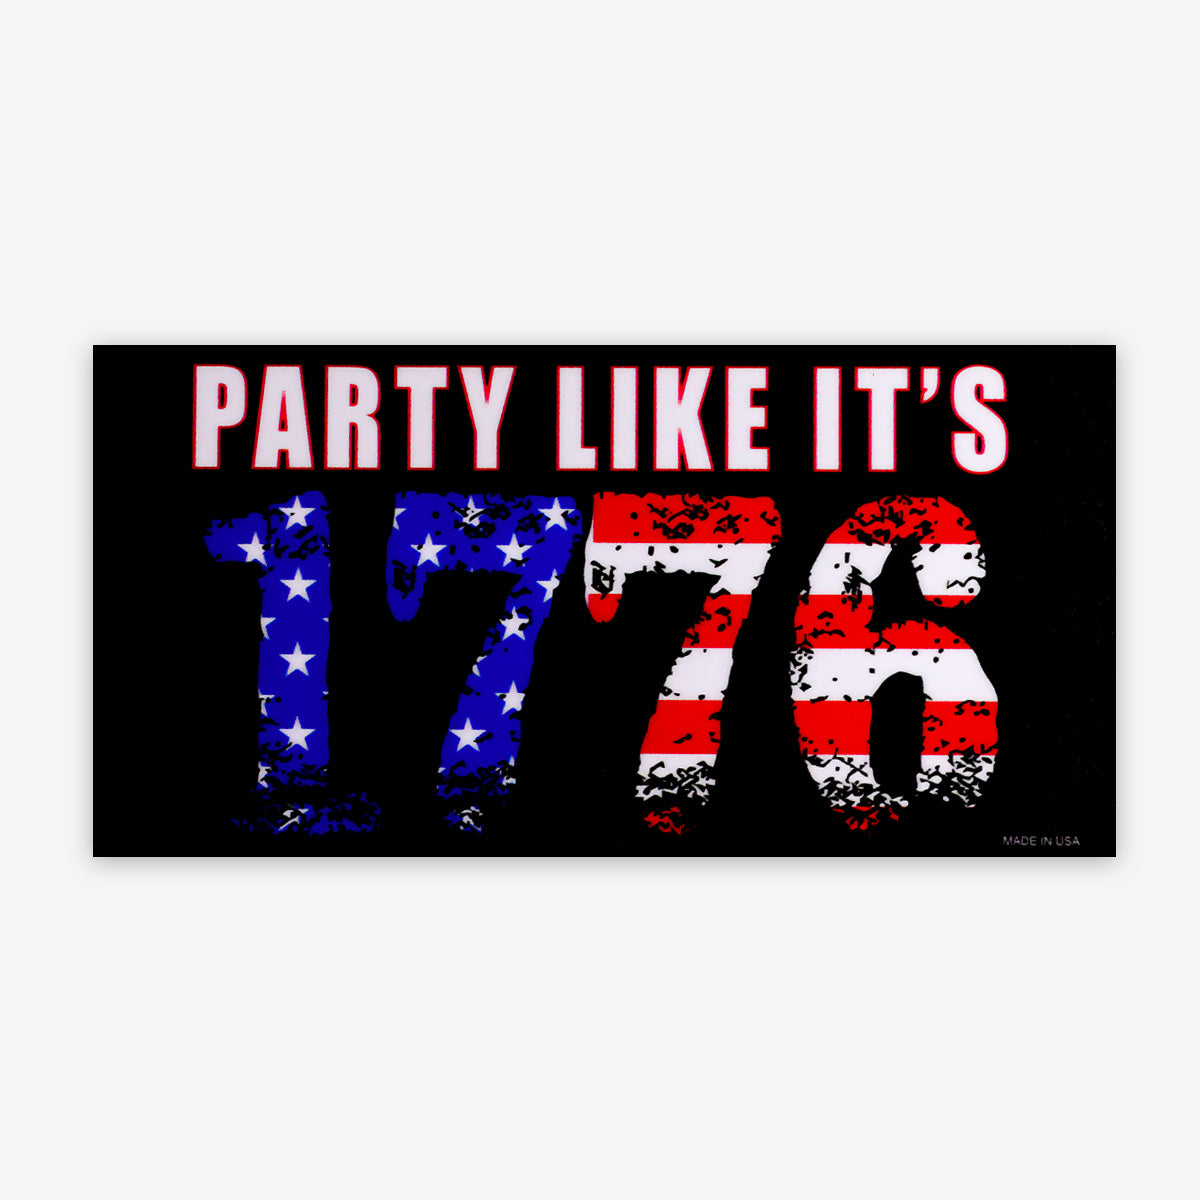 Party like it's 1776 Magnet